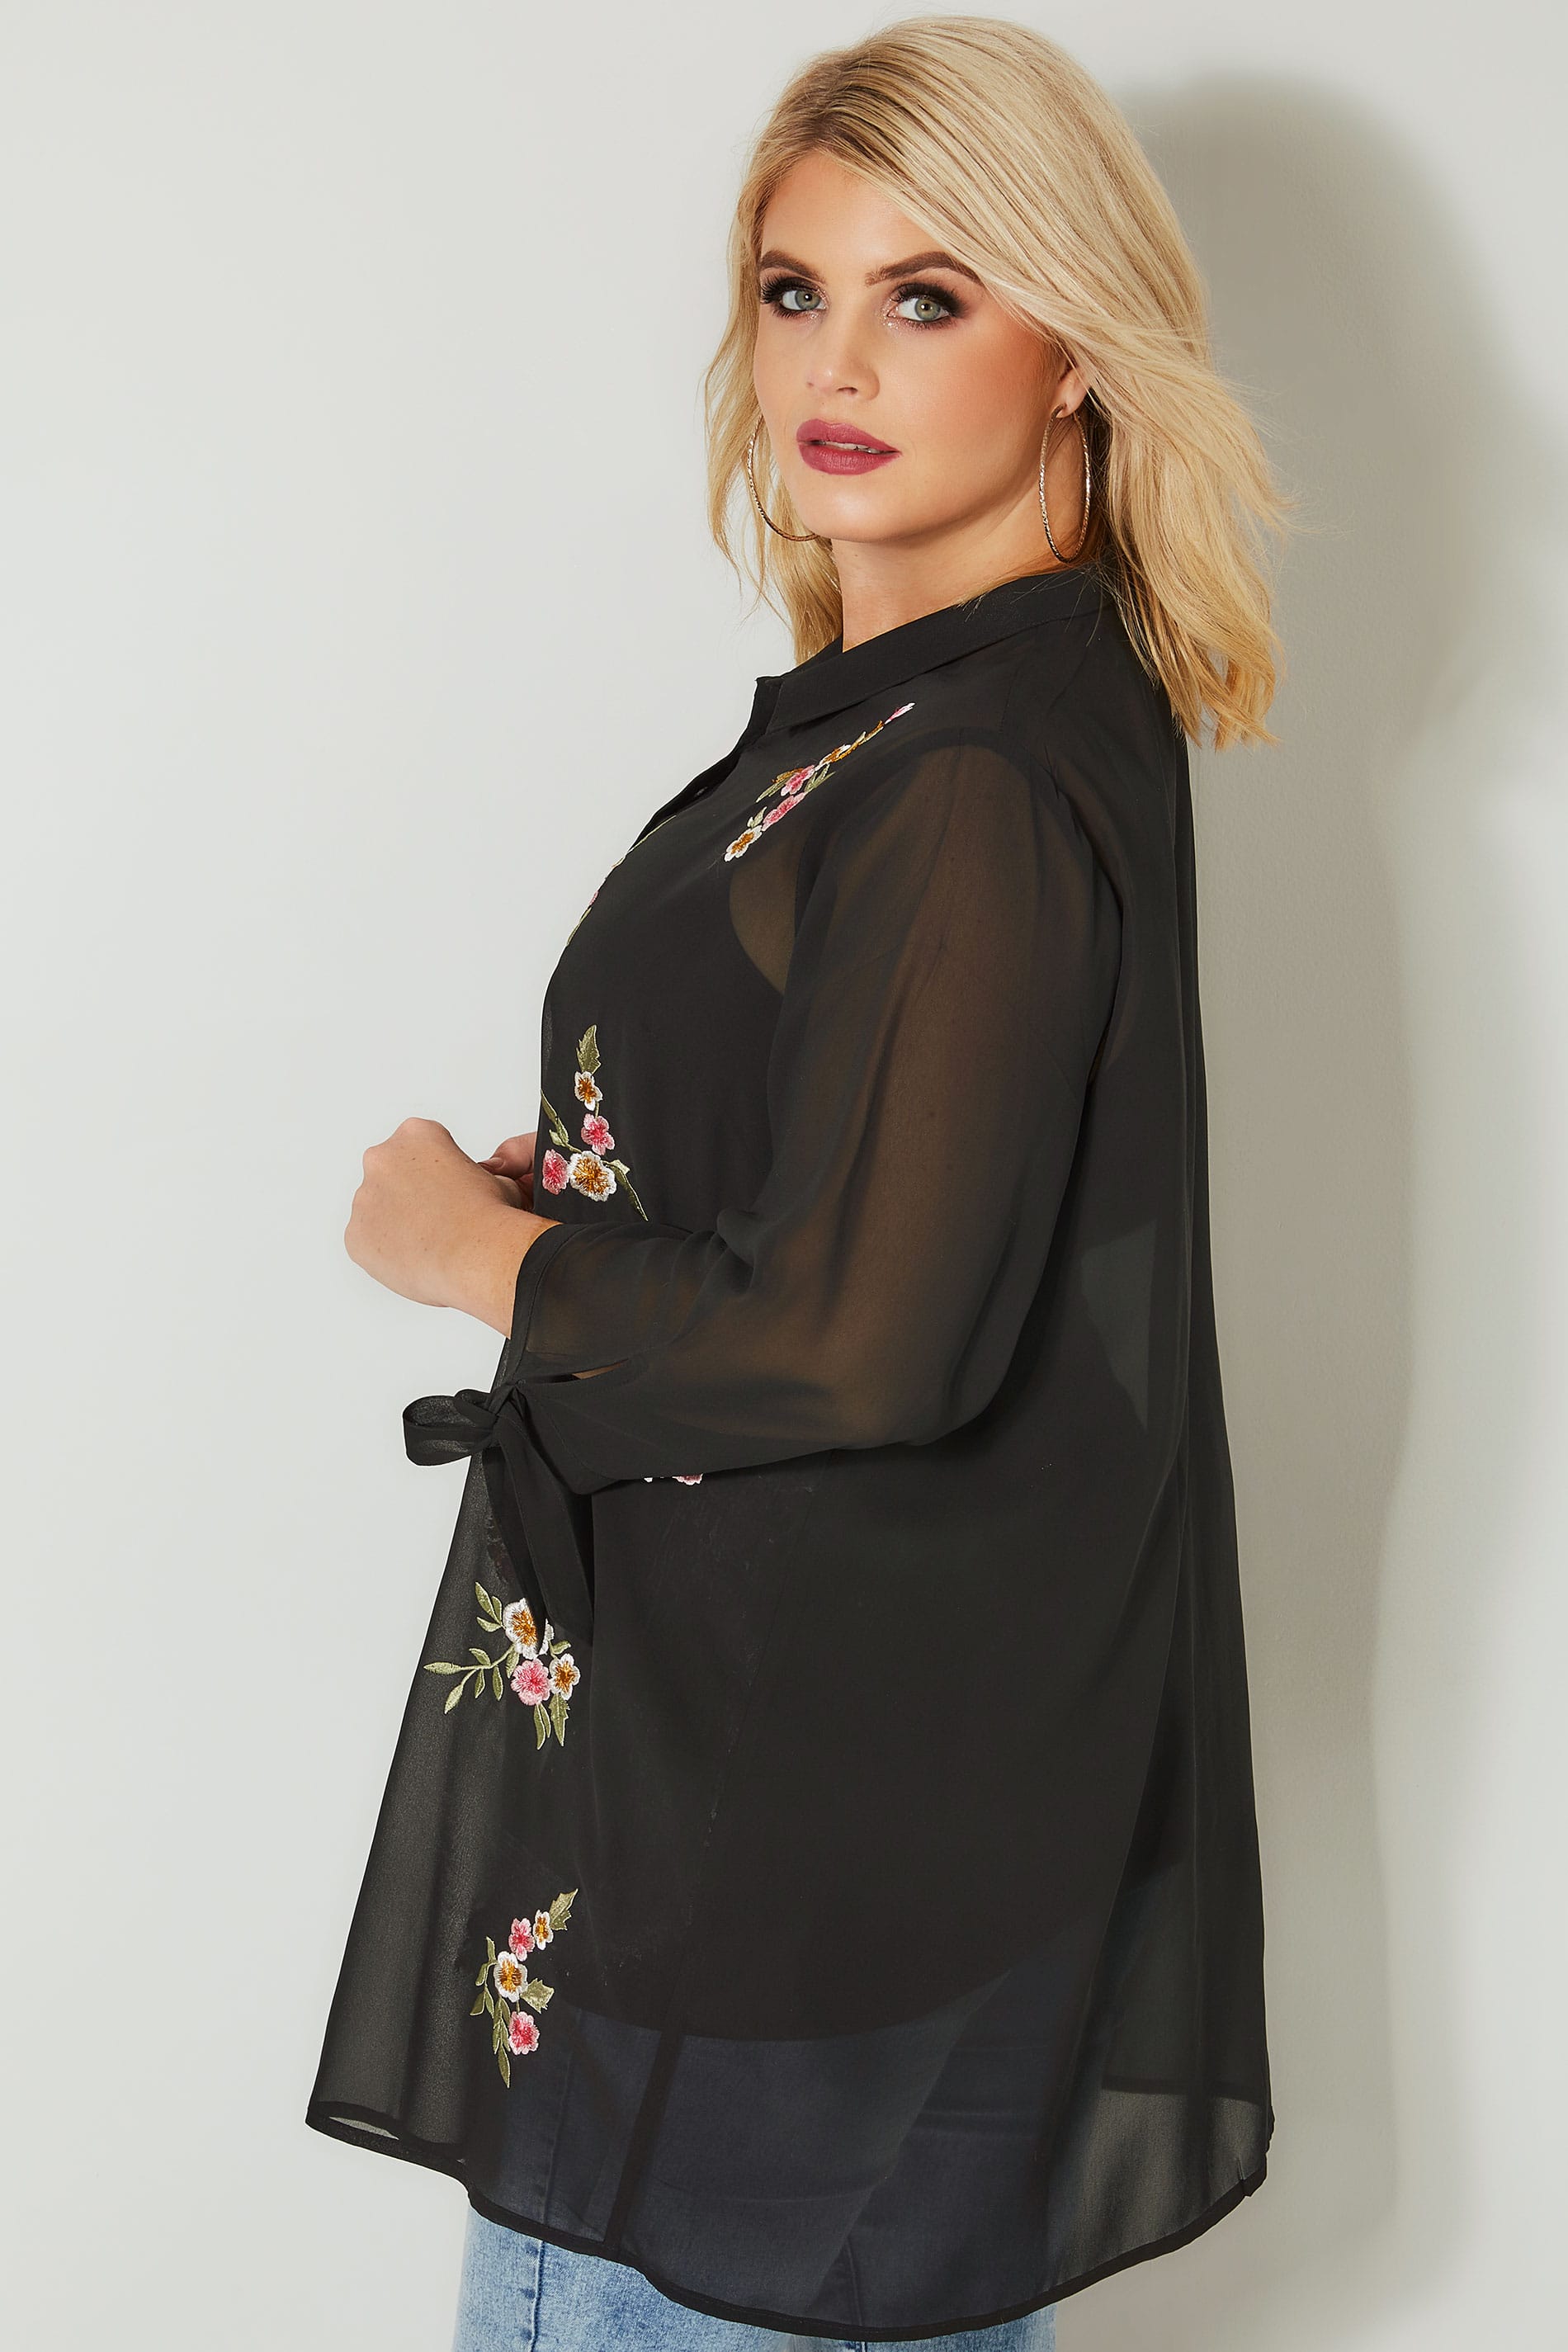 Black Floral Embroidered Longline Chiffon Shirt, plus size 16 to 36